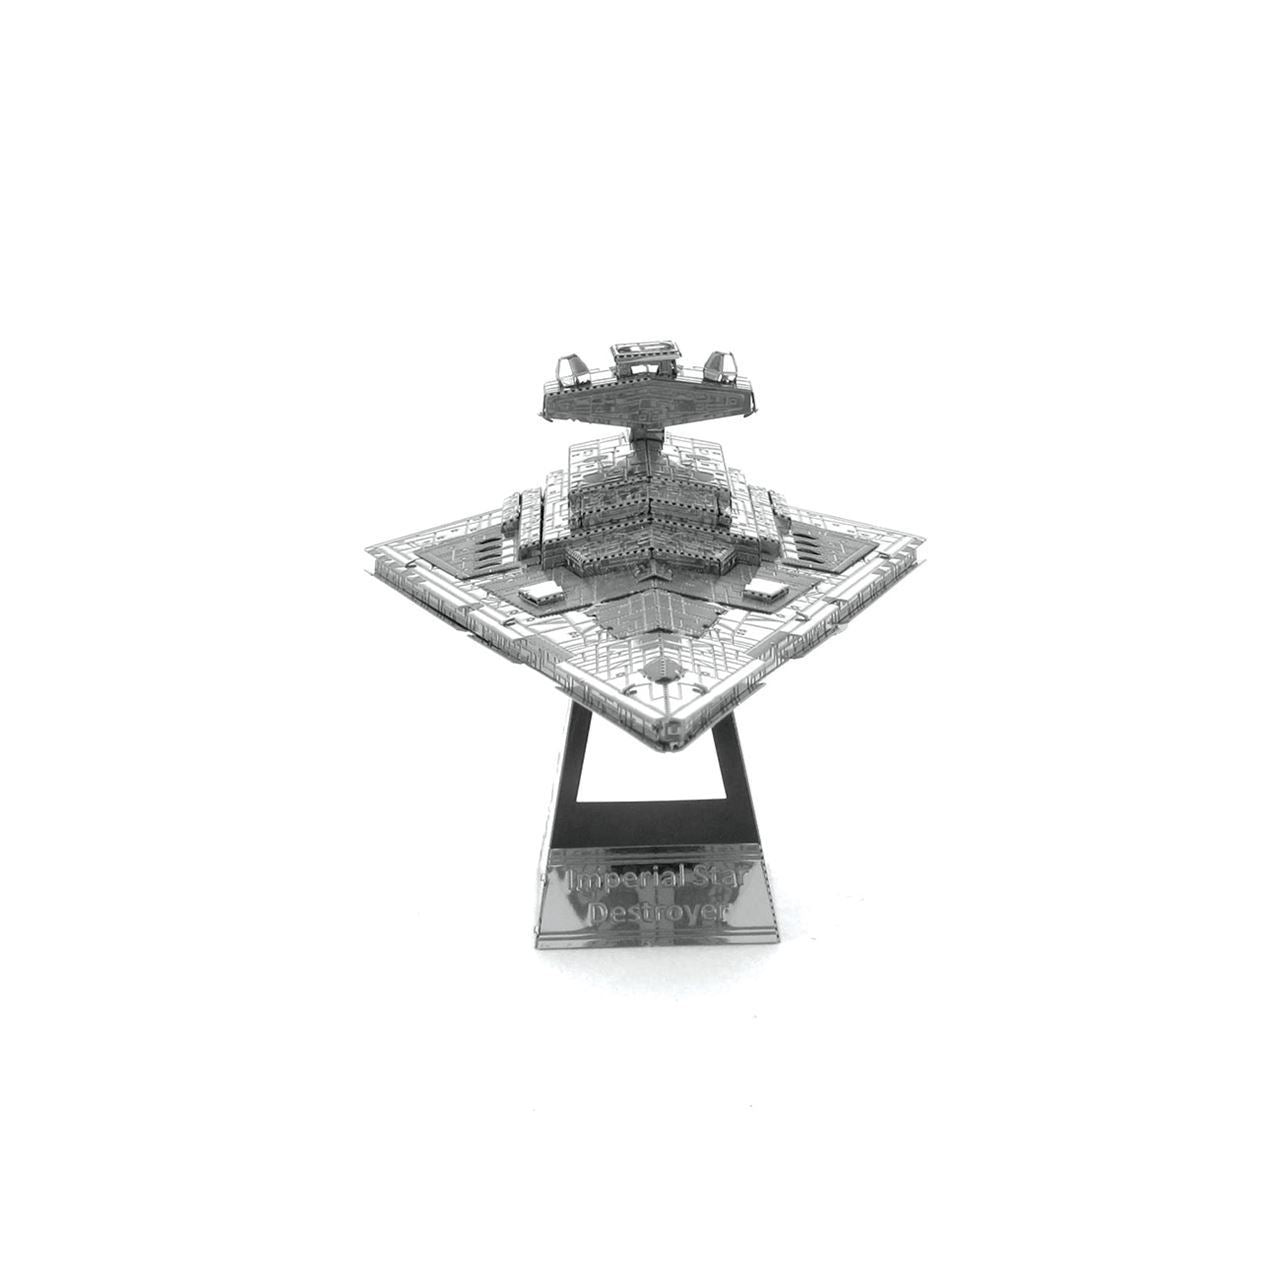 IMPERIAL STAR DESTROYER™ - Steel 3D Model Kit gift puzzle puzzle